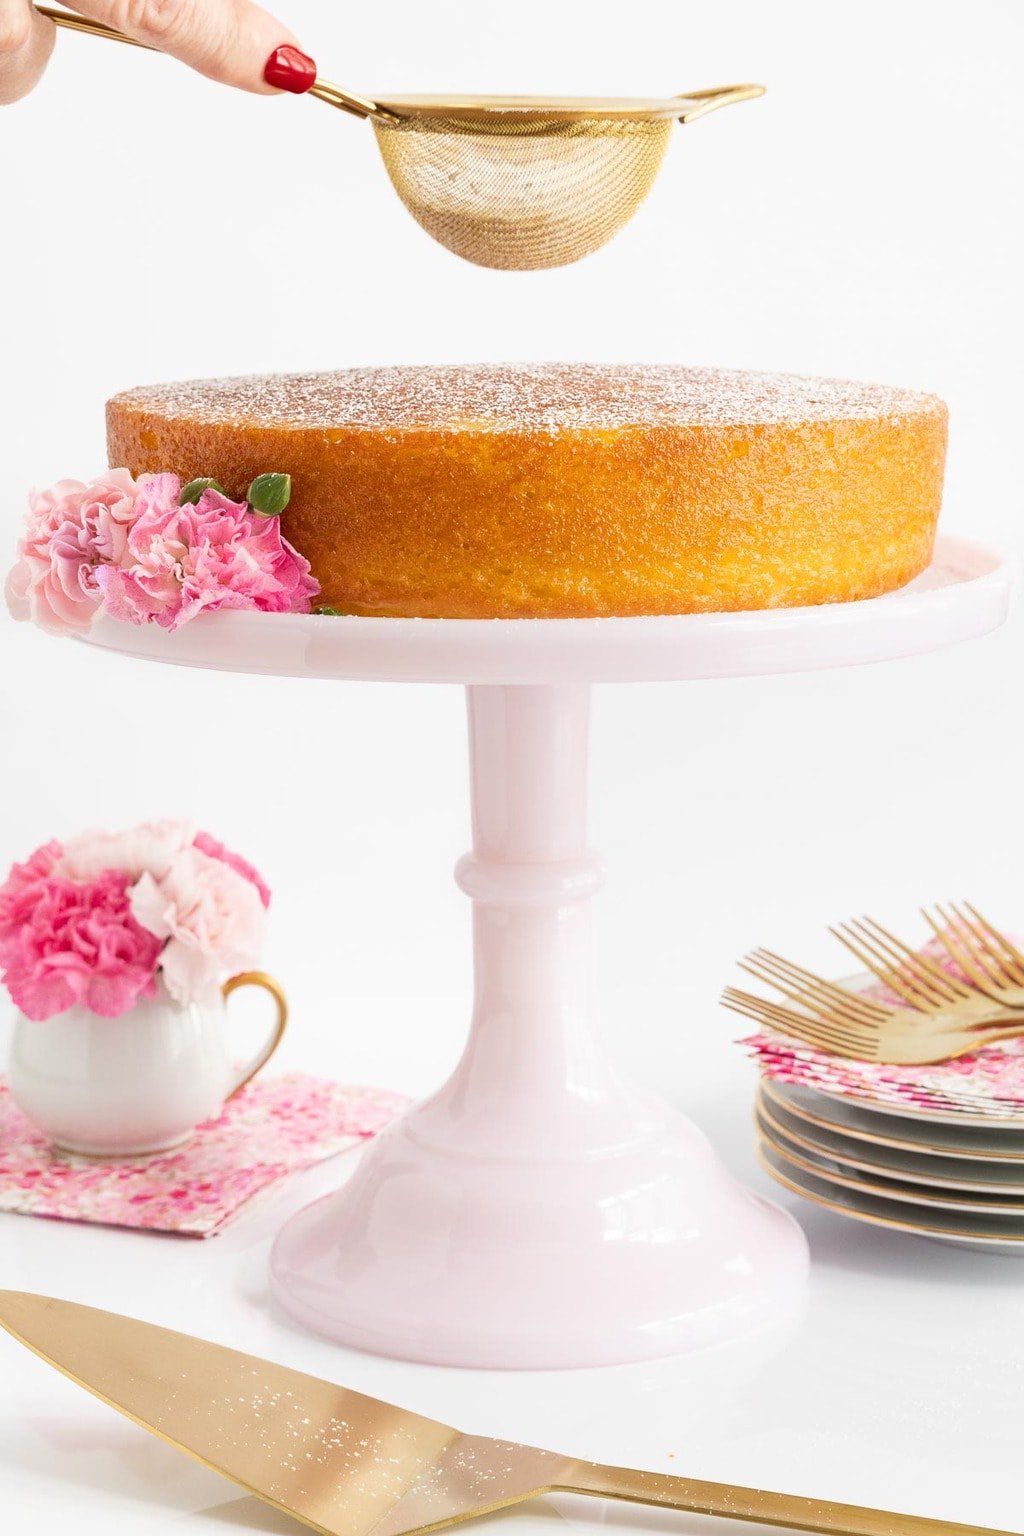 Vertical photo of a Ridiculously Easy French Butter Cake on a light pink pedestal cake stand decorated with flowers.